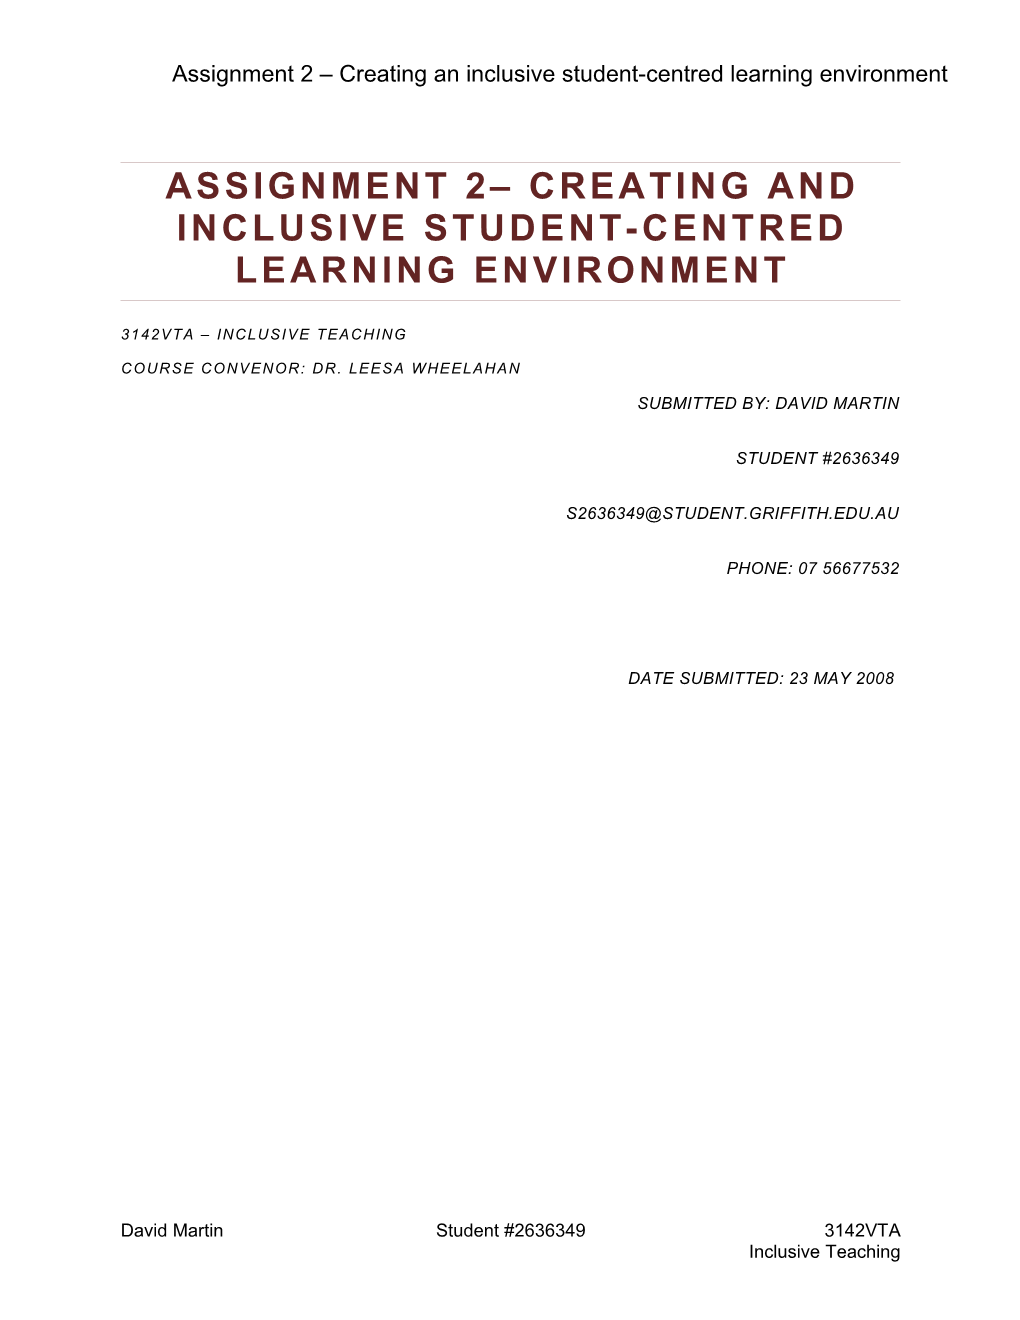 Assignment 2 Creating an Inclusive Student-Centred Learning Environment